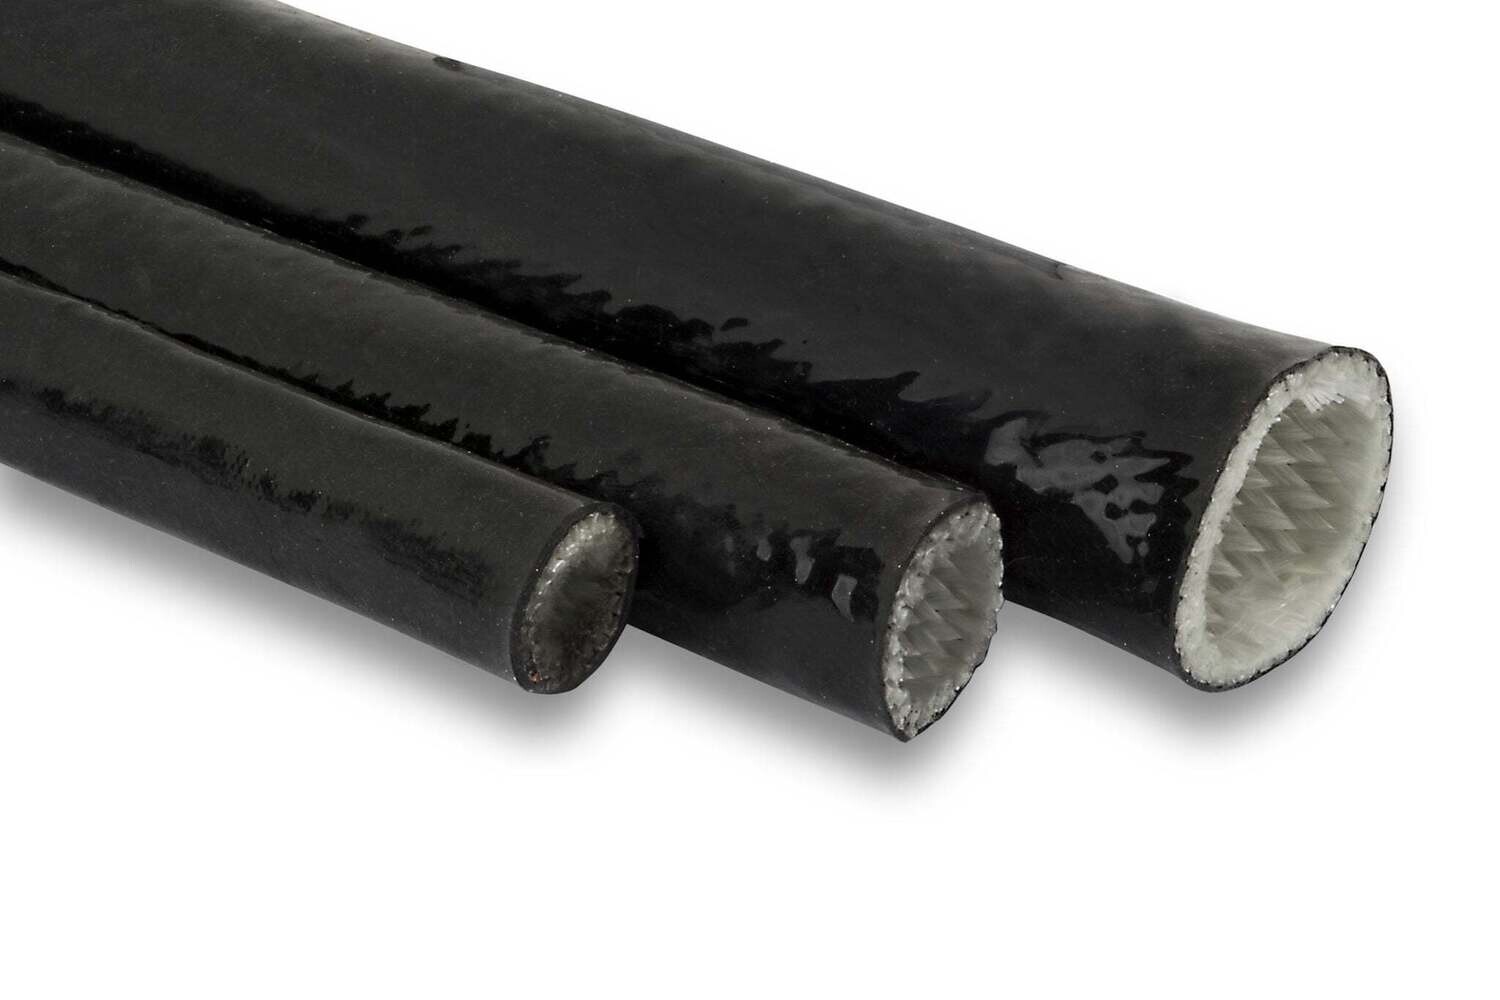 Black Silicon High Heat Sleeve - AN8 (Utilises 15mm Sleeving), 2.0m Multiple Qty will come on a continuous Roll